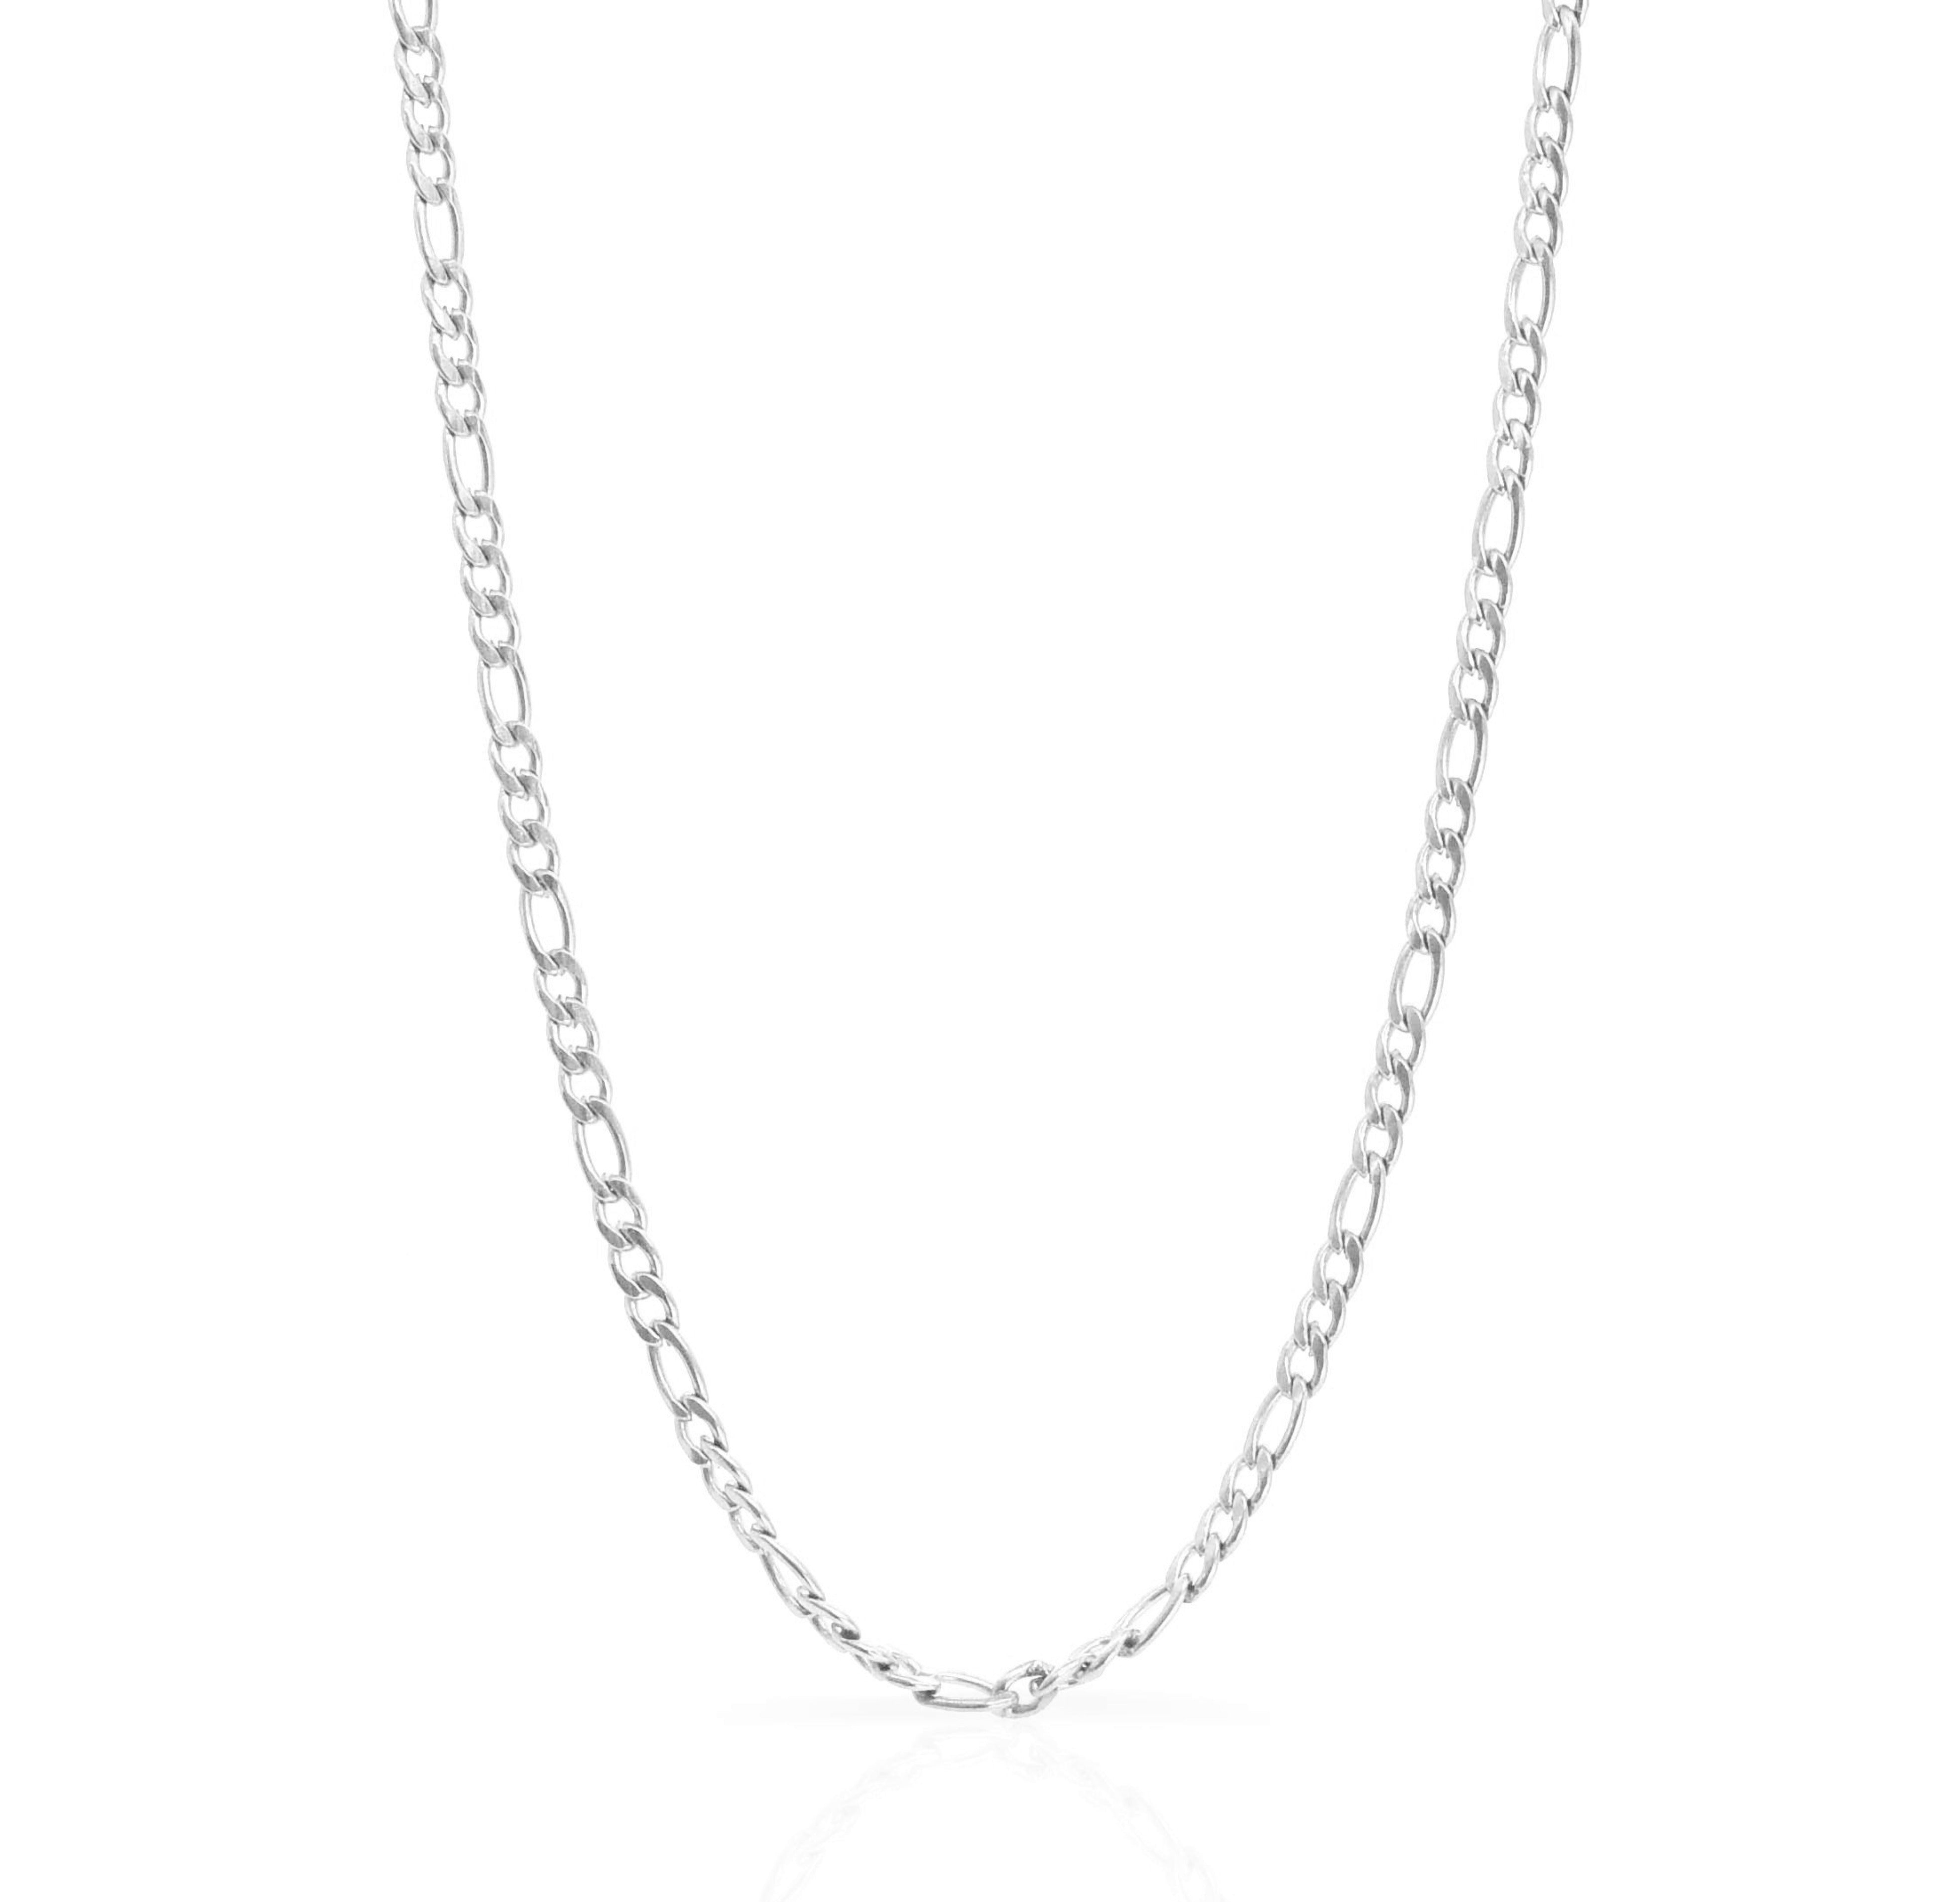 dainty silver chain necklace